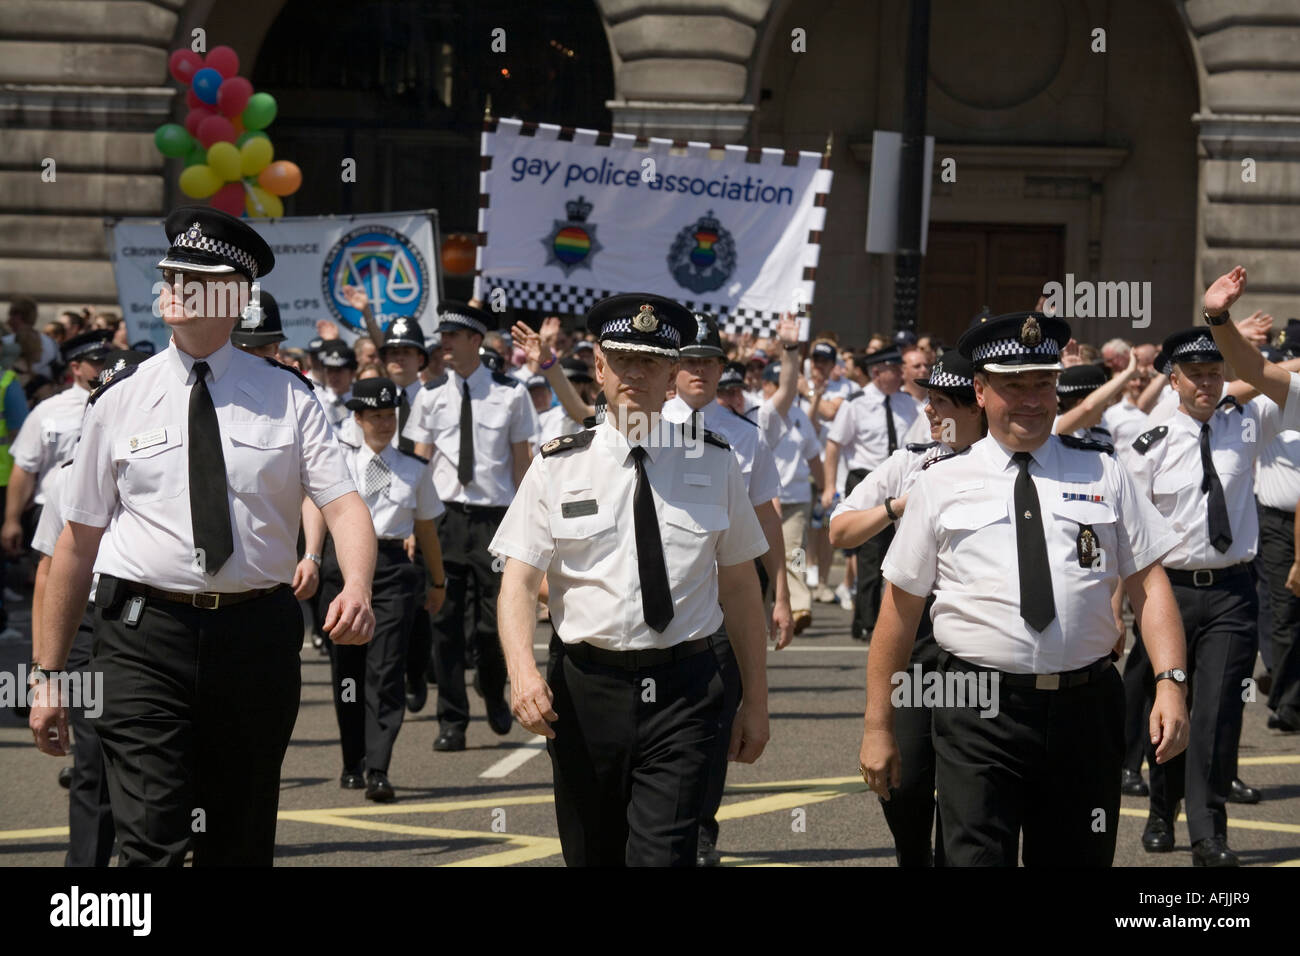 Members of the gay police associetion are marching in Piccadilly during the EuroPride parade London Stock Photo